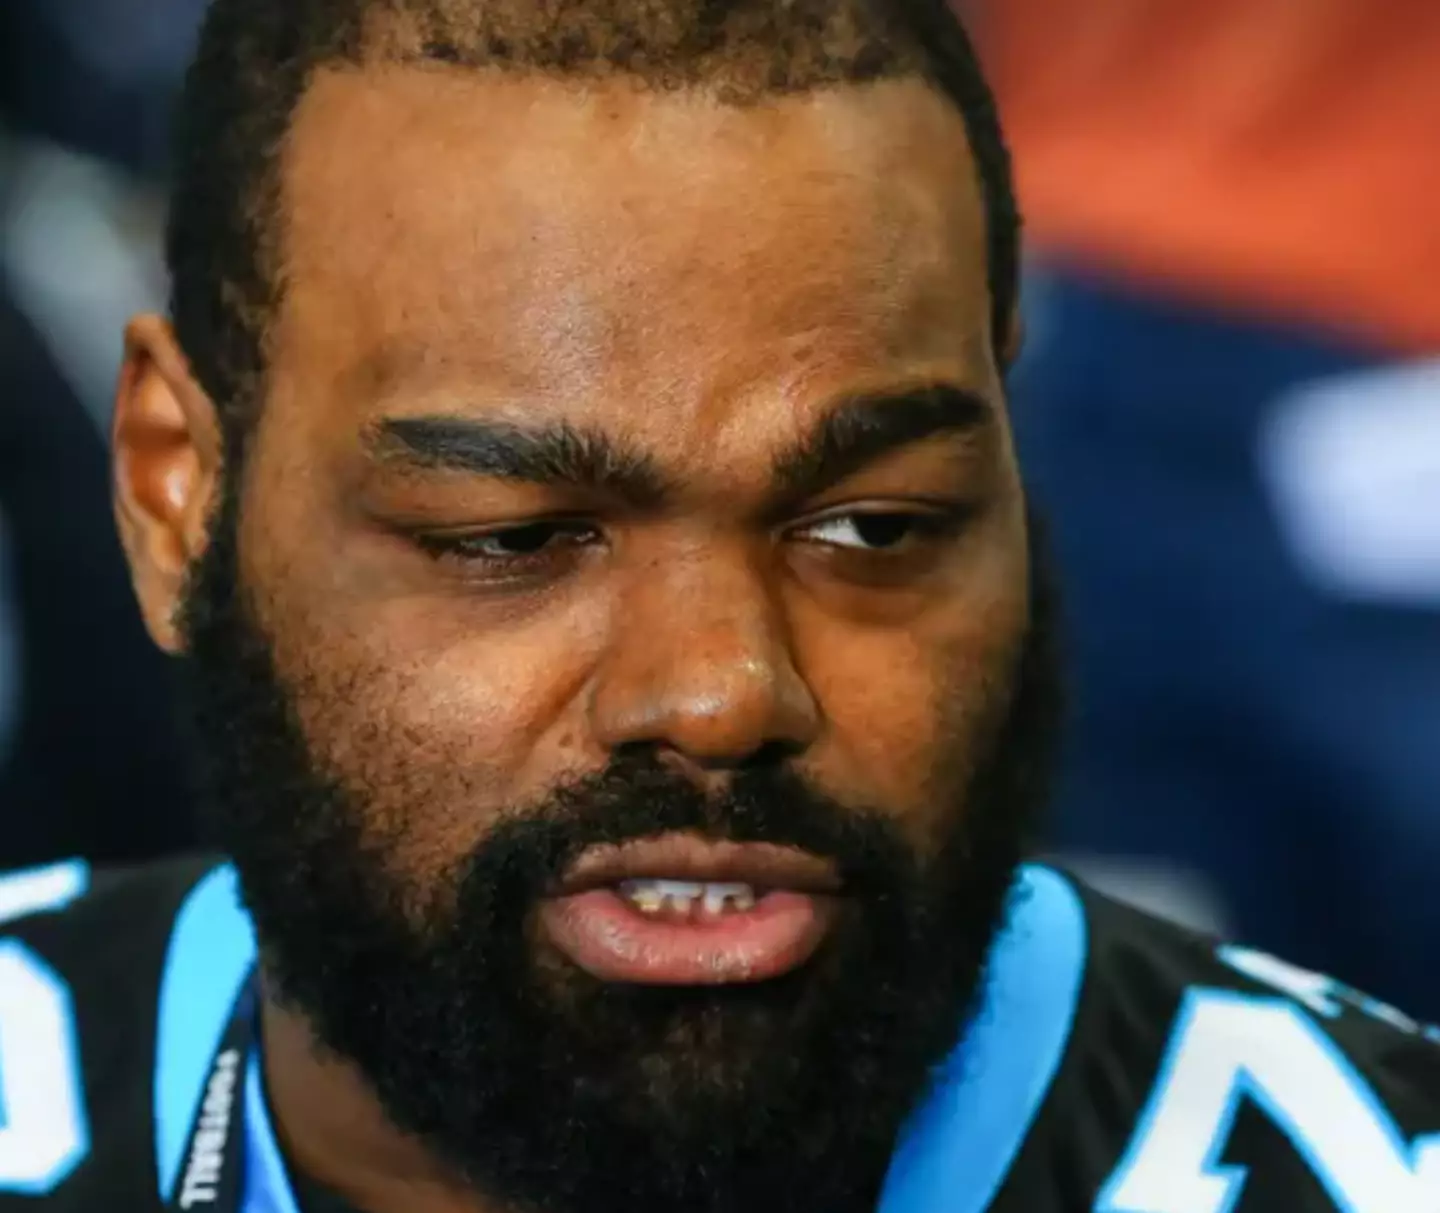 Michael Oher claimed to believe he had been adopted by the Tuohys.